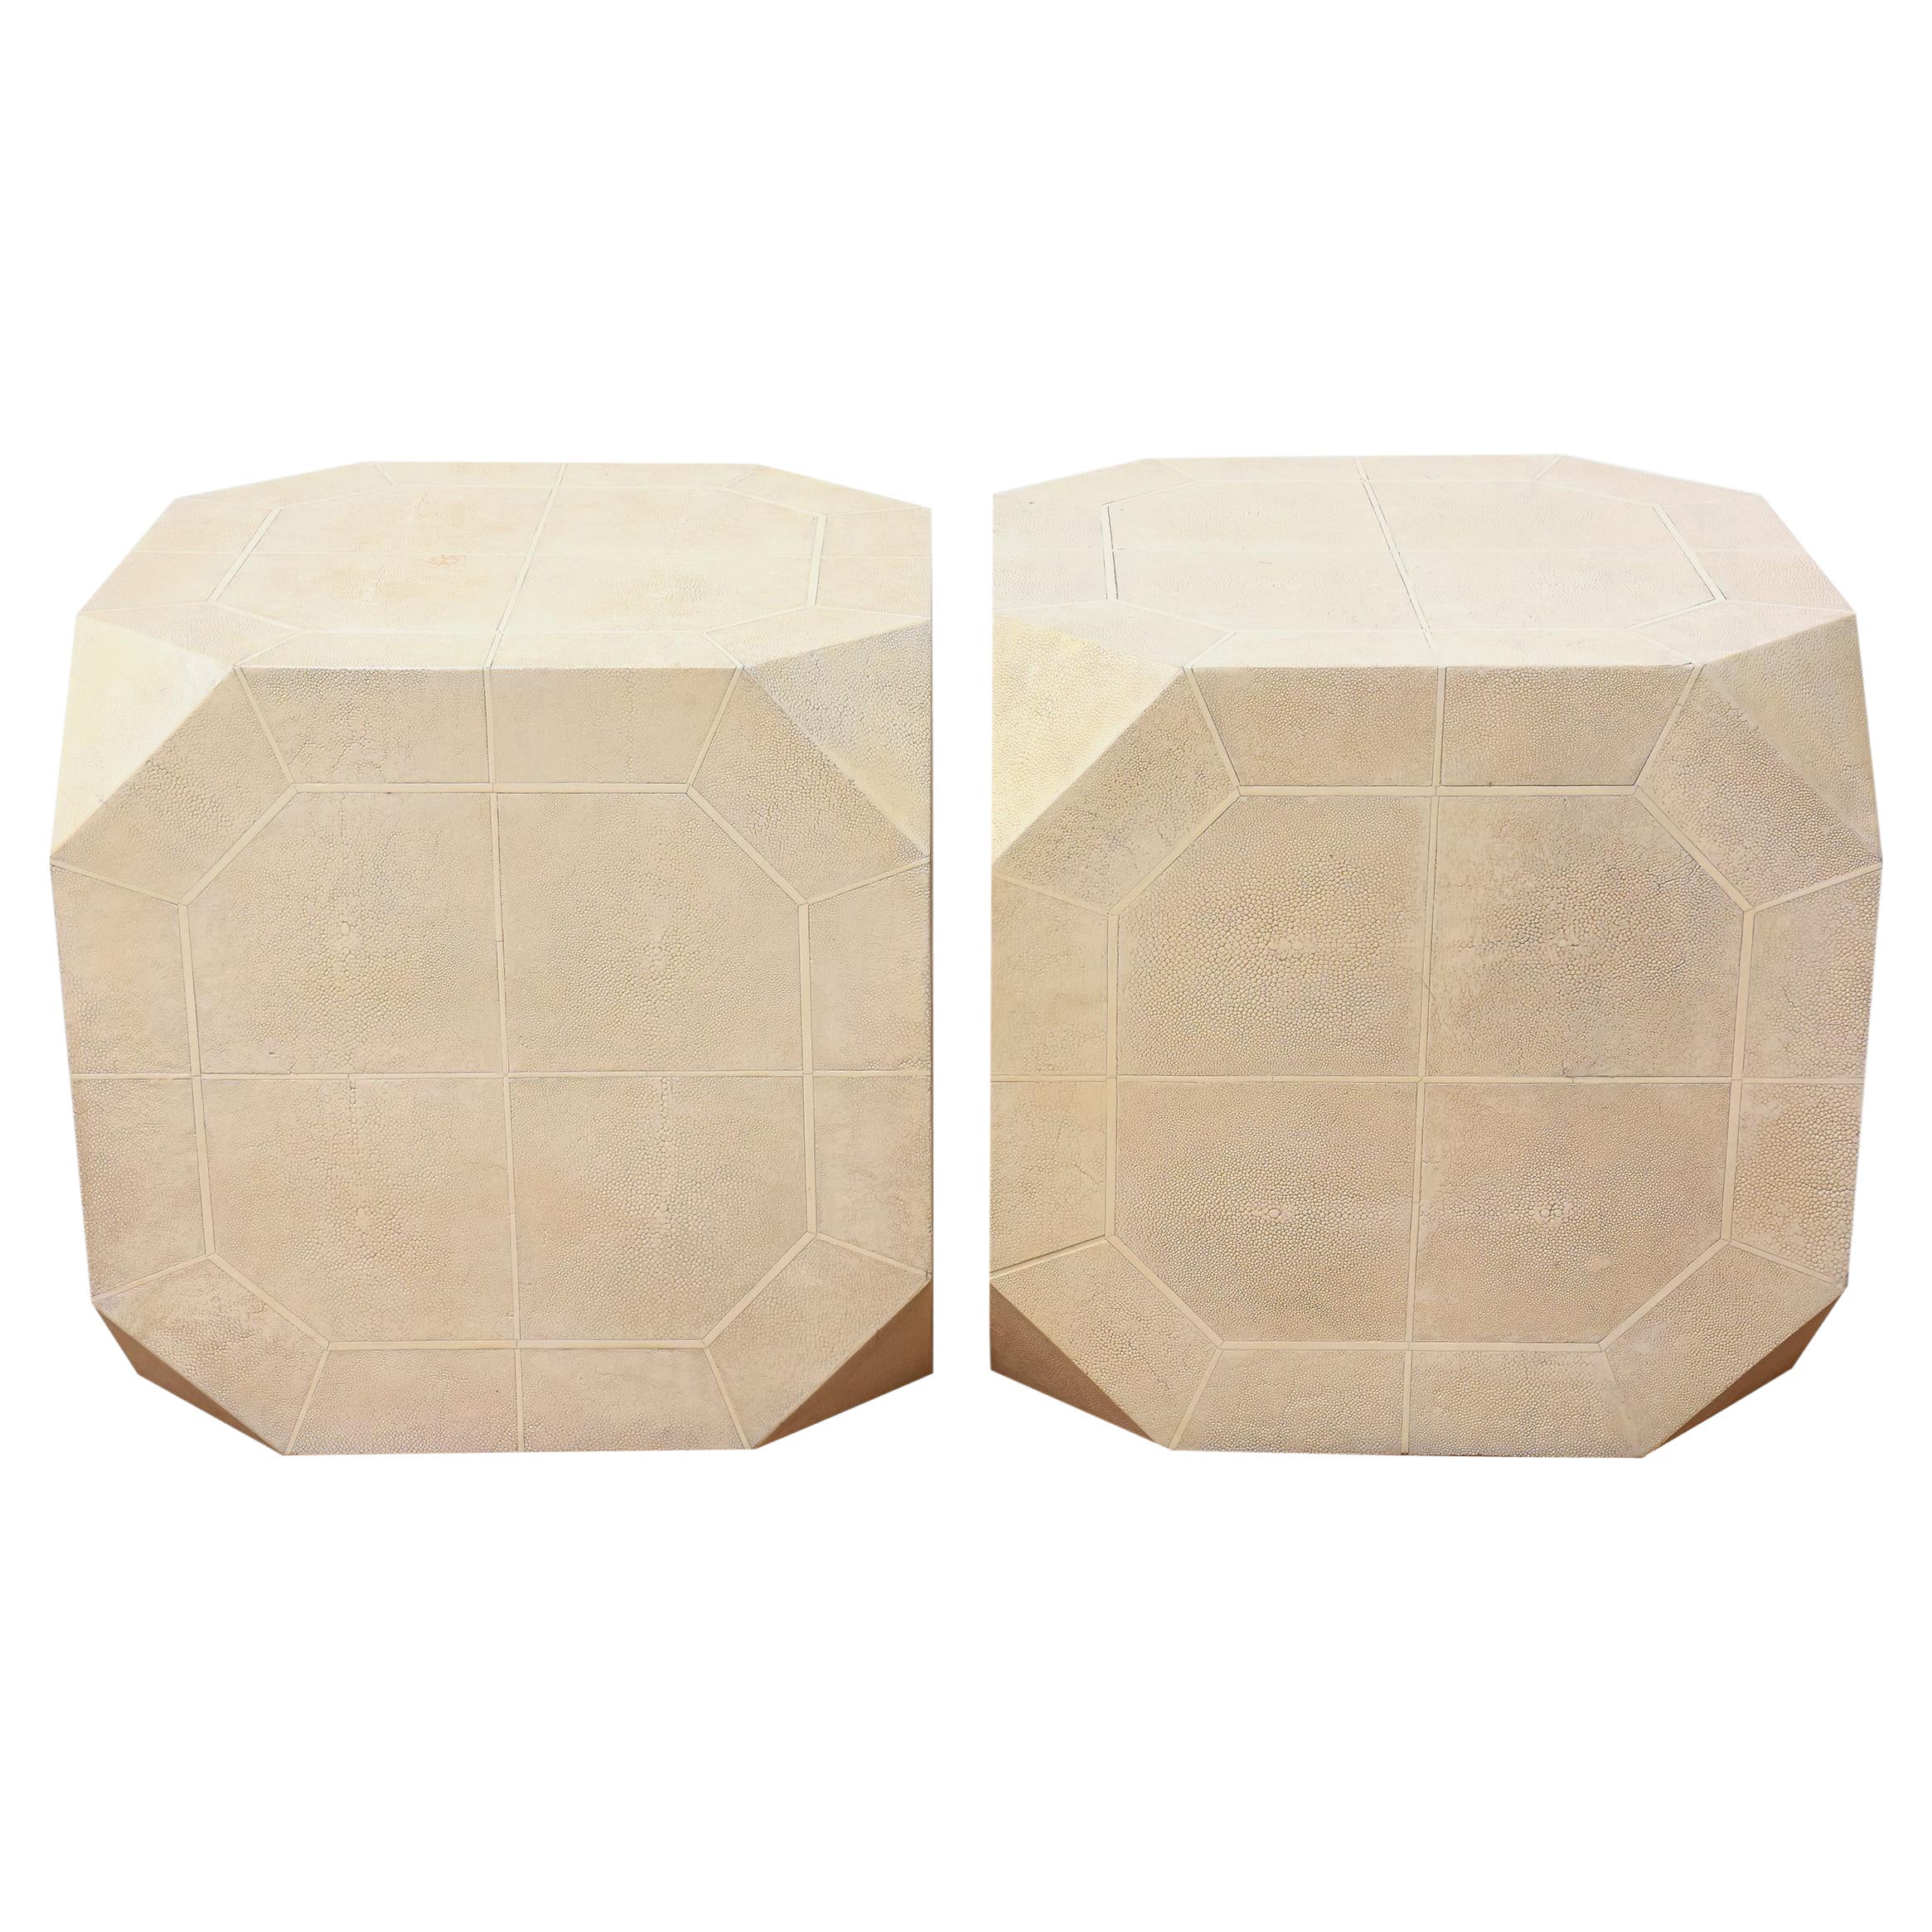 Ron Seff Cream and Off White Shagreen and Bone Inlaid Rare Side Tables Pair For Sale